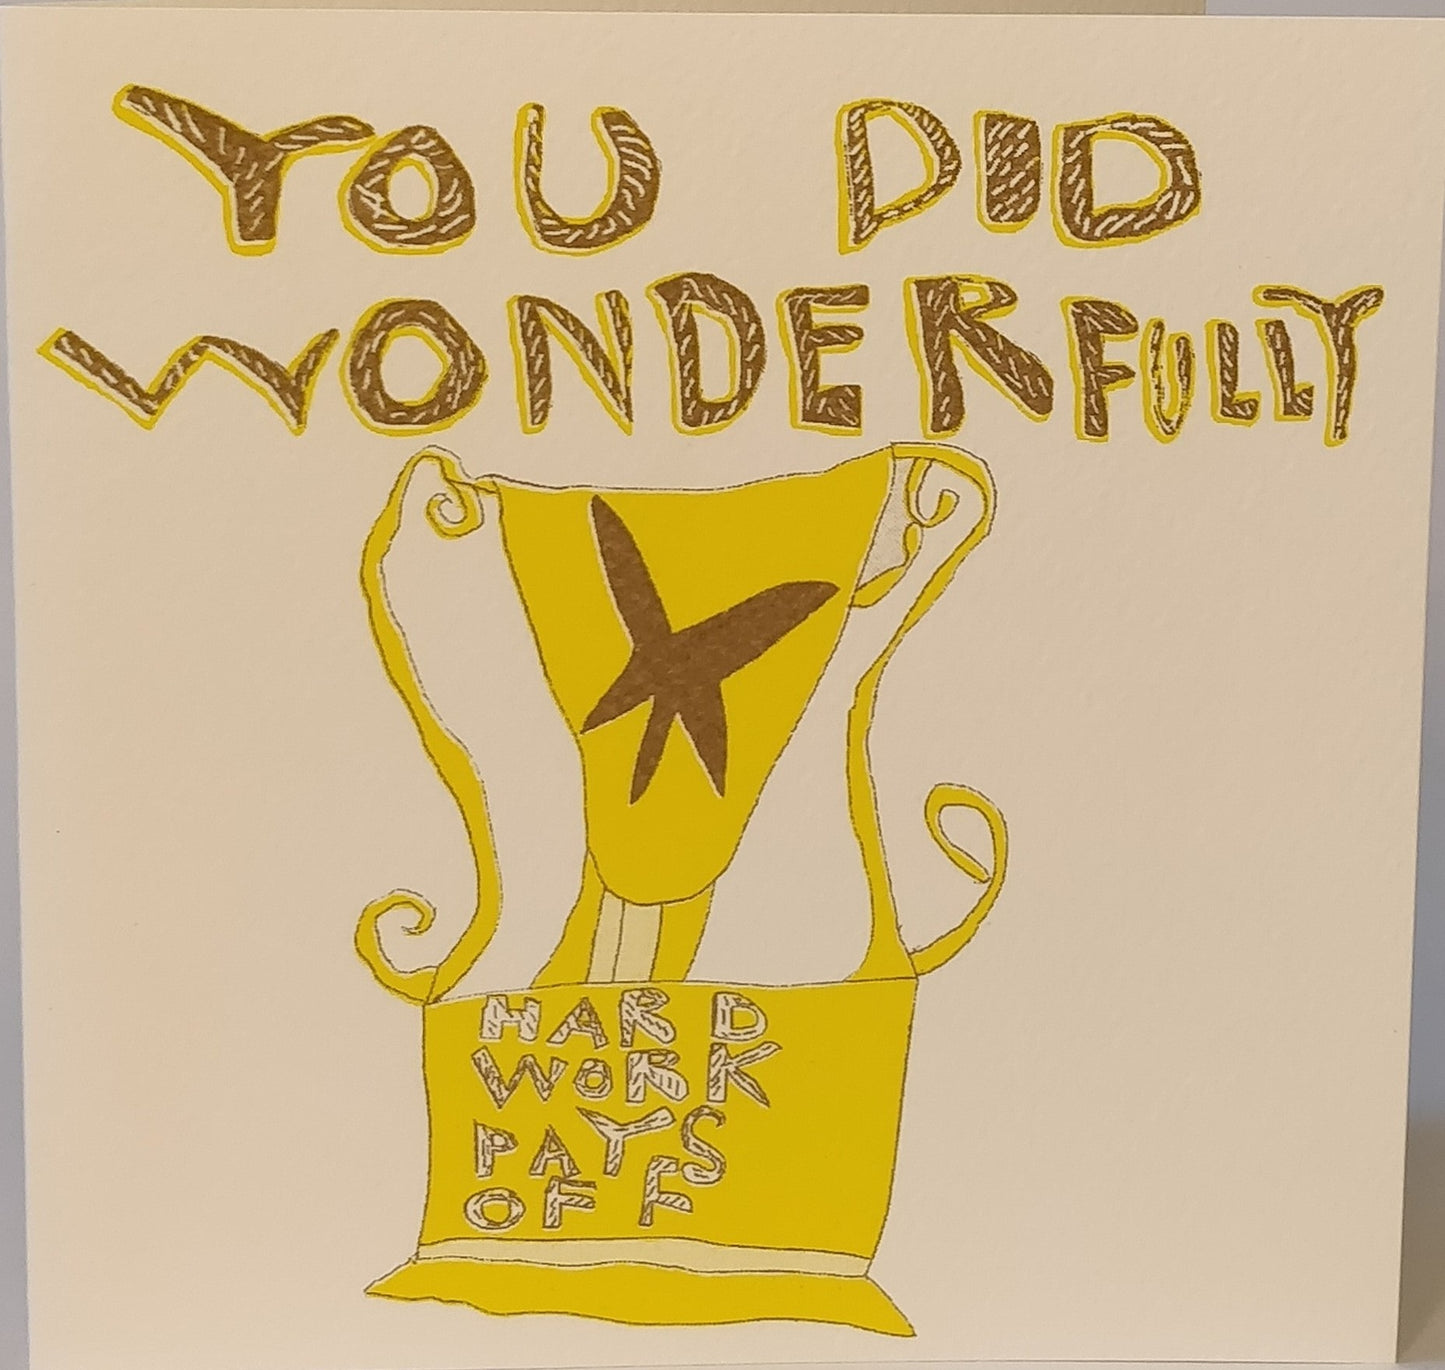 You Did Wonderfully blank recycled celebration card from ARTHOUSE Unlimited